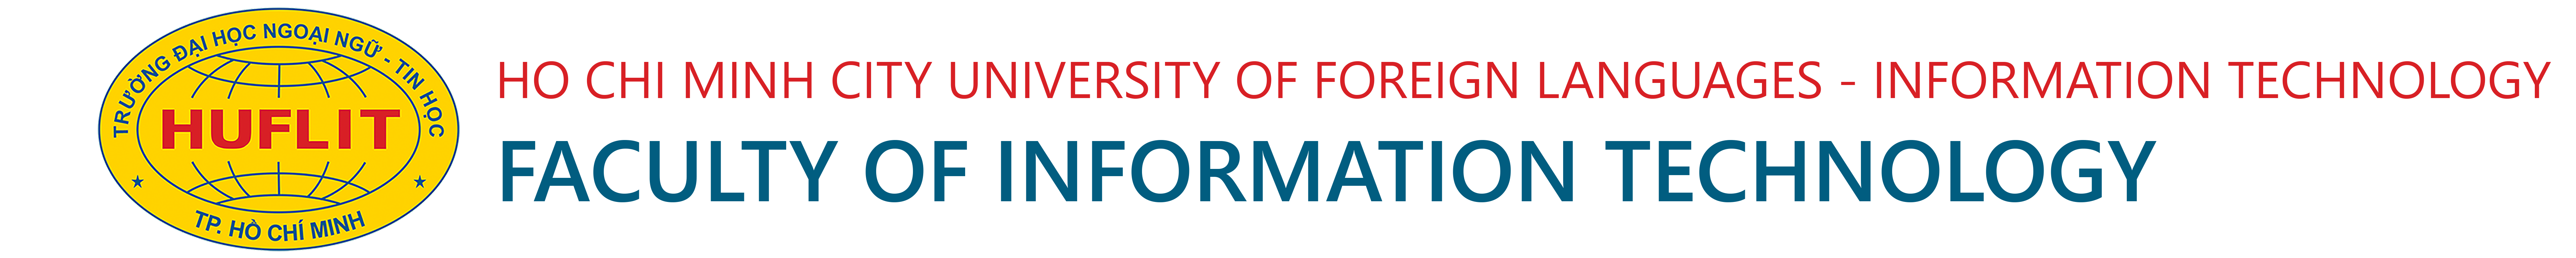 Ho Chi Minh City University of Foreign Languages - Information Technology